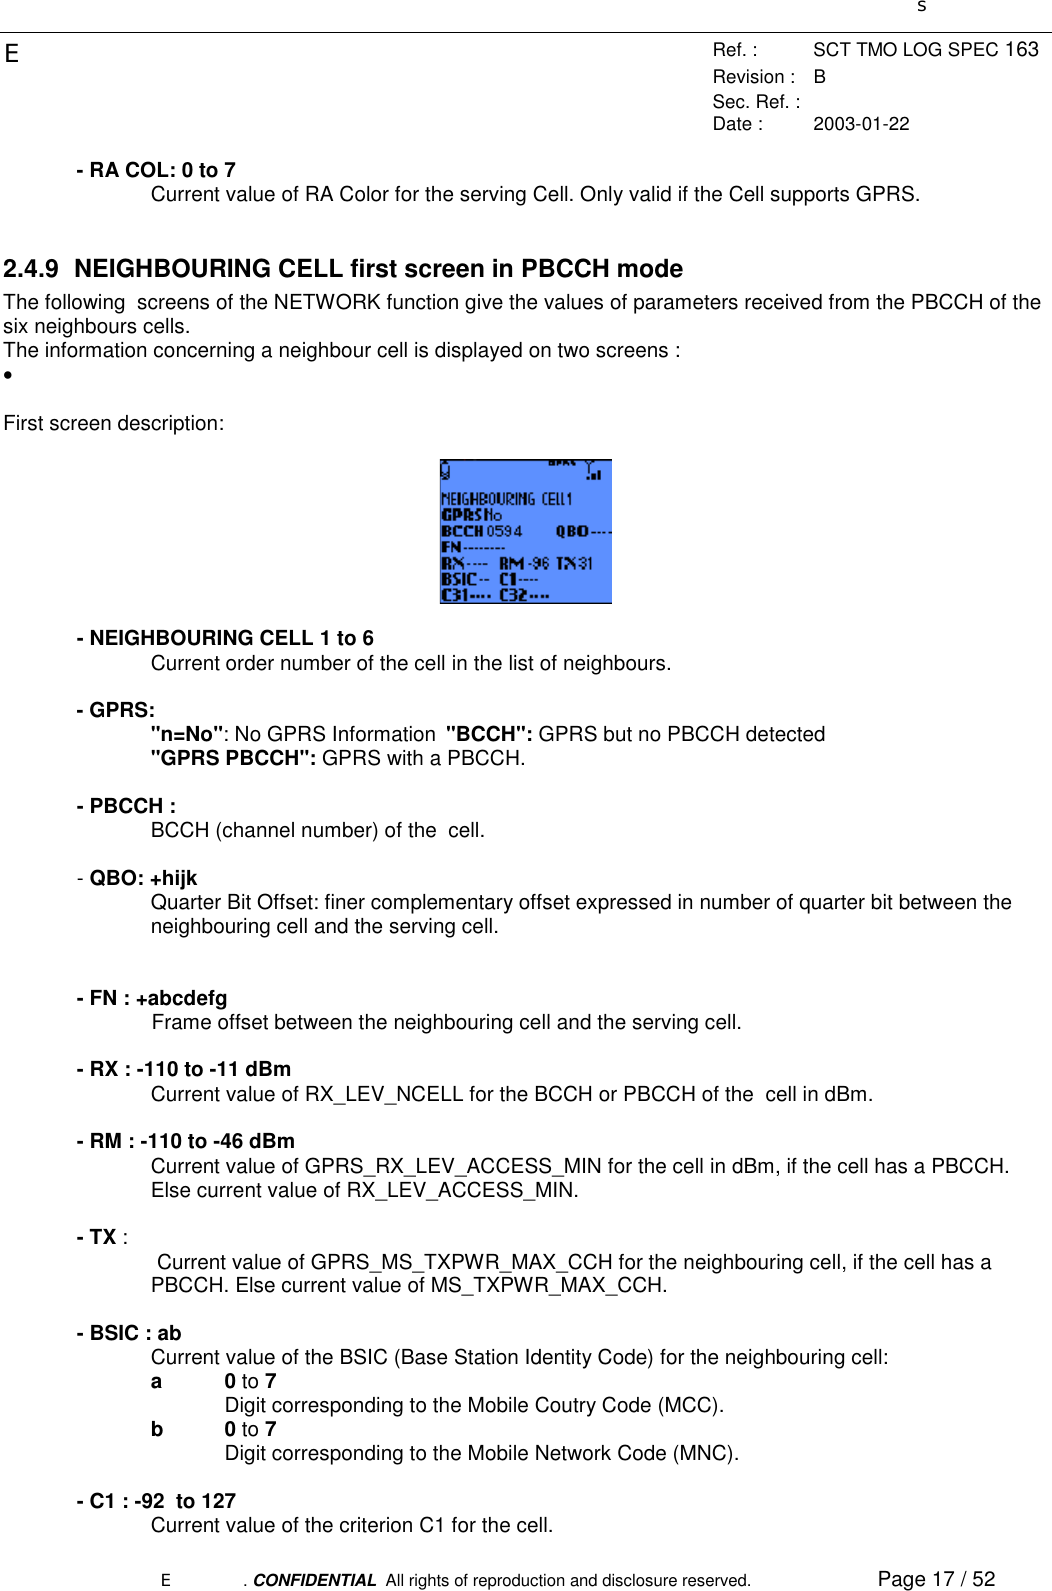 sERef. : SCT TMO LOG SPEC 163Revision : BSec. Ref. :Date : 2003-01-22E. CONFIDENTIAL  All rights of reproduction and disclosure reserved. Page 17 / 52- RA COL: 0 to 7Current value of RA Color for the serving Cell. Only valid if the Cell supports GPRS.2.4.9  NEIGHBOURING CELL first screen in PBCCH modeThe following  screens of the NETWORK function give the values of parameters received from the PBCCH of thesix neighbours cells.The information concerning a neighbour cell is displayed on two screens :• First screen description:- NEIGHBOURING CELL 1 to 6Current order number of the cell in the list of neighbours.- GPRS:&quot;n=No&quot;: No GPRS Information &quot;BCCH&quot;: GPRS but no PBCCH detected&quot;GPRS PBCCH&quot;: GPRS with a PBCCH.- PBCCH :BCCH (channel number) of the  cell.- QBO: +hijkQuarter Bit Offset: finer complementary offset expressed in number of quarter bit between theneighbouring cell and the serving cell.- FN : +abcdefgFrame offset between the neighbouring cell and the serving cell.- RX : -110 to -11 dBmCurrent value of RX_LEV_NCELL for the BCCH or PBCCH of the  cell in dBm.- RM : -110 to -46 dBmCurrent value of GPRS_RX_LEV_ACCESS_MIN for the cell in dBm, if the cell has a PBCCH.Else current value of RX_LEV_ACCESS_MIN.- TX : Current value of GPRS_MS_TXPWR_MAX_CCH for the neighbouring cell, if the cell has aPBCCH. Else current value of MS_TXPWR_MAX_CCH.- BSIC : abCurrent value of the BSIC (Base Station Identity Code) for the neighbouring cell:a0 to 7Digit corresponding to the Mobile Coutry Code (MCC).b0 to 7Digit corresponding to the Mobile Network Code (MNC).- C1 : -92  to 127Current value of the criterion C1 for the cell.